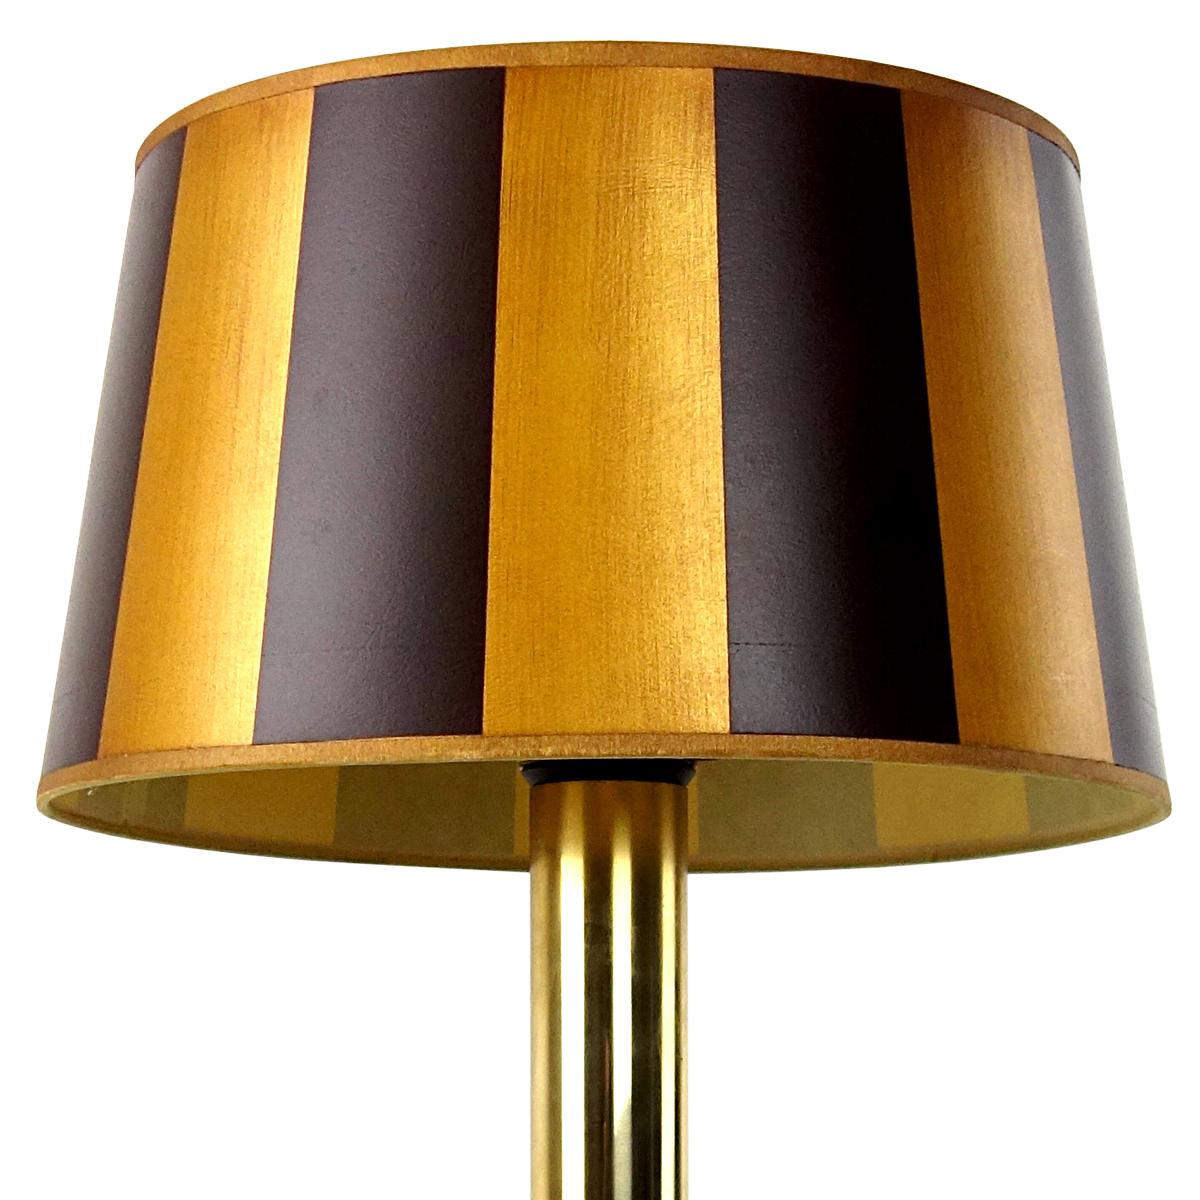 The base of this table lamp by German light specialist Doria Leuchten is made of smoked glass. It contains three bulbs, providing for dramatic lighting. There is another bulb underneath the striped shade. 
This lamp has many opulent brass accents.